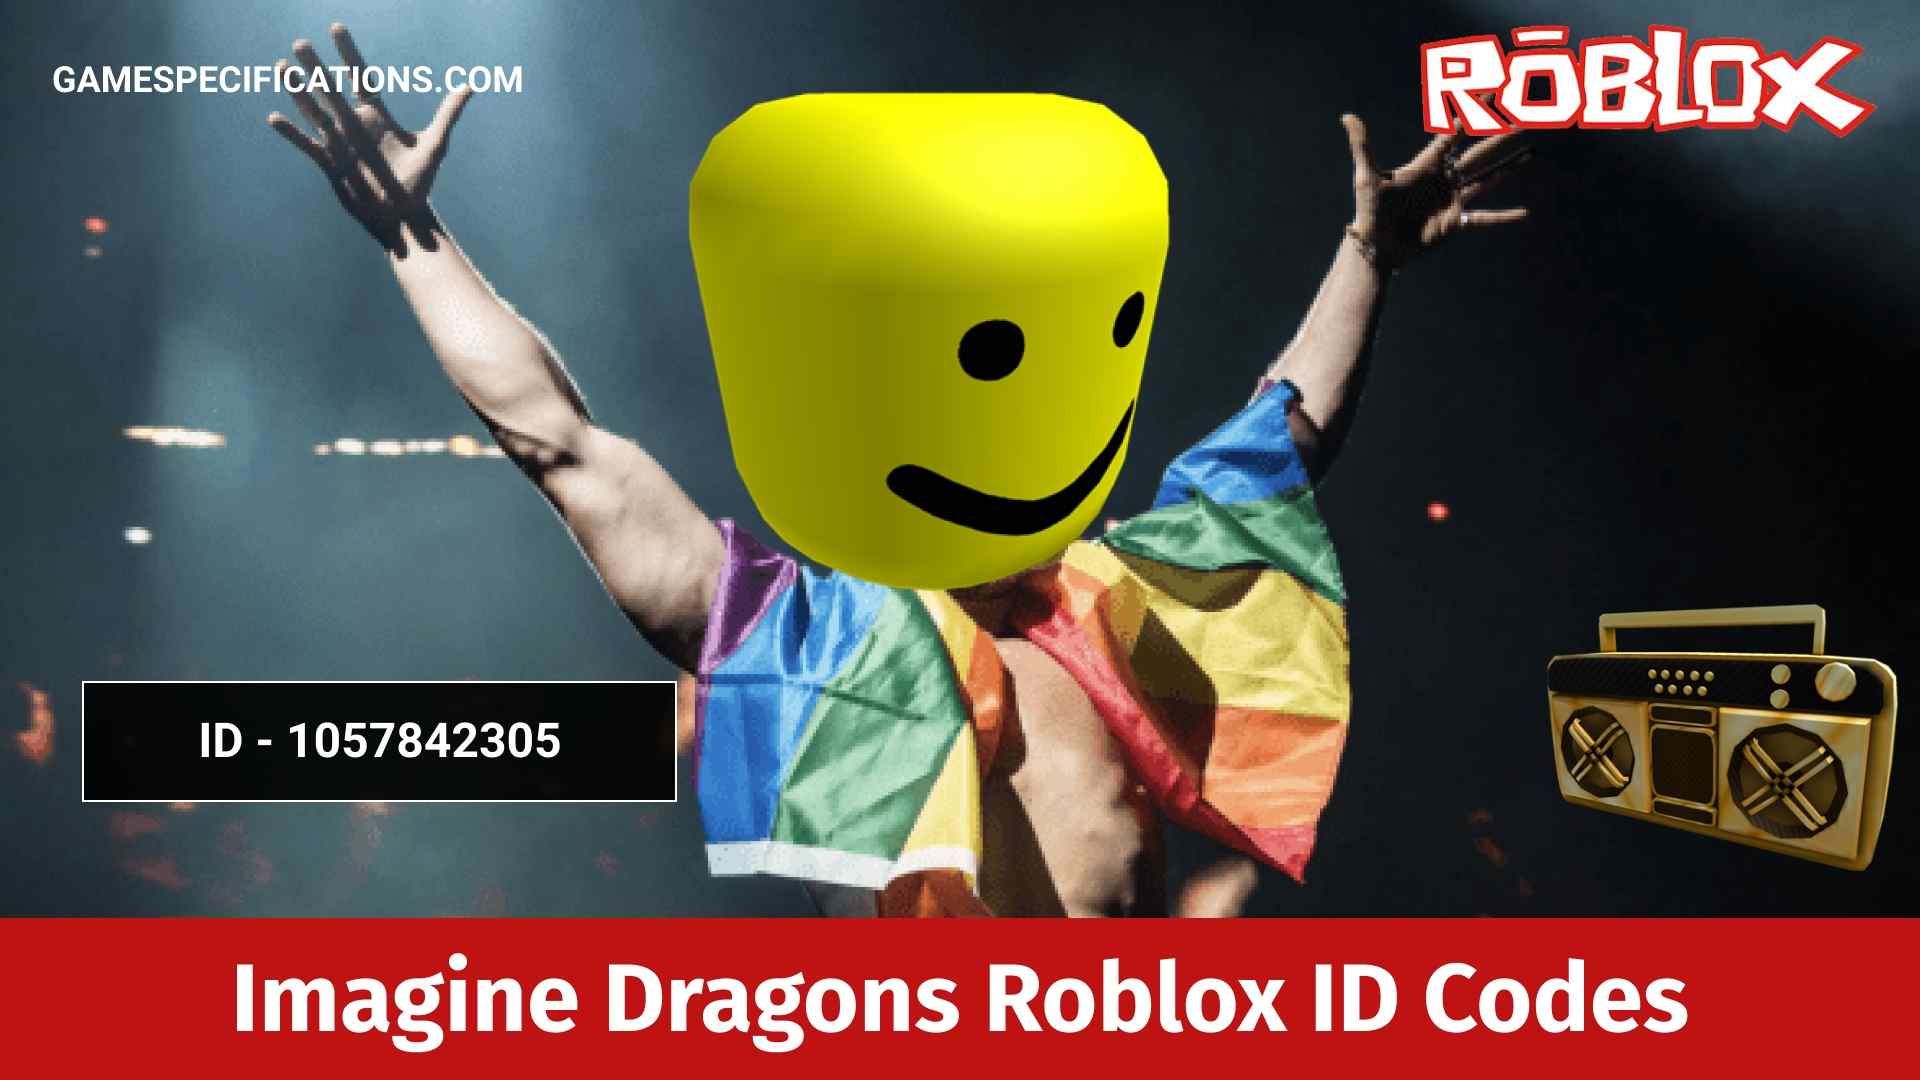 50 Imagine Dragons Roblox Id Codes 2021 Game Specifications - my demons roblox song id